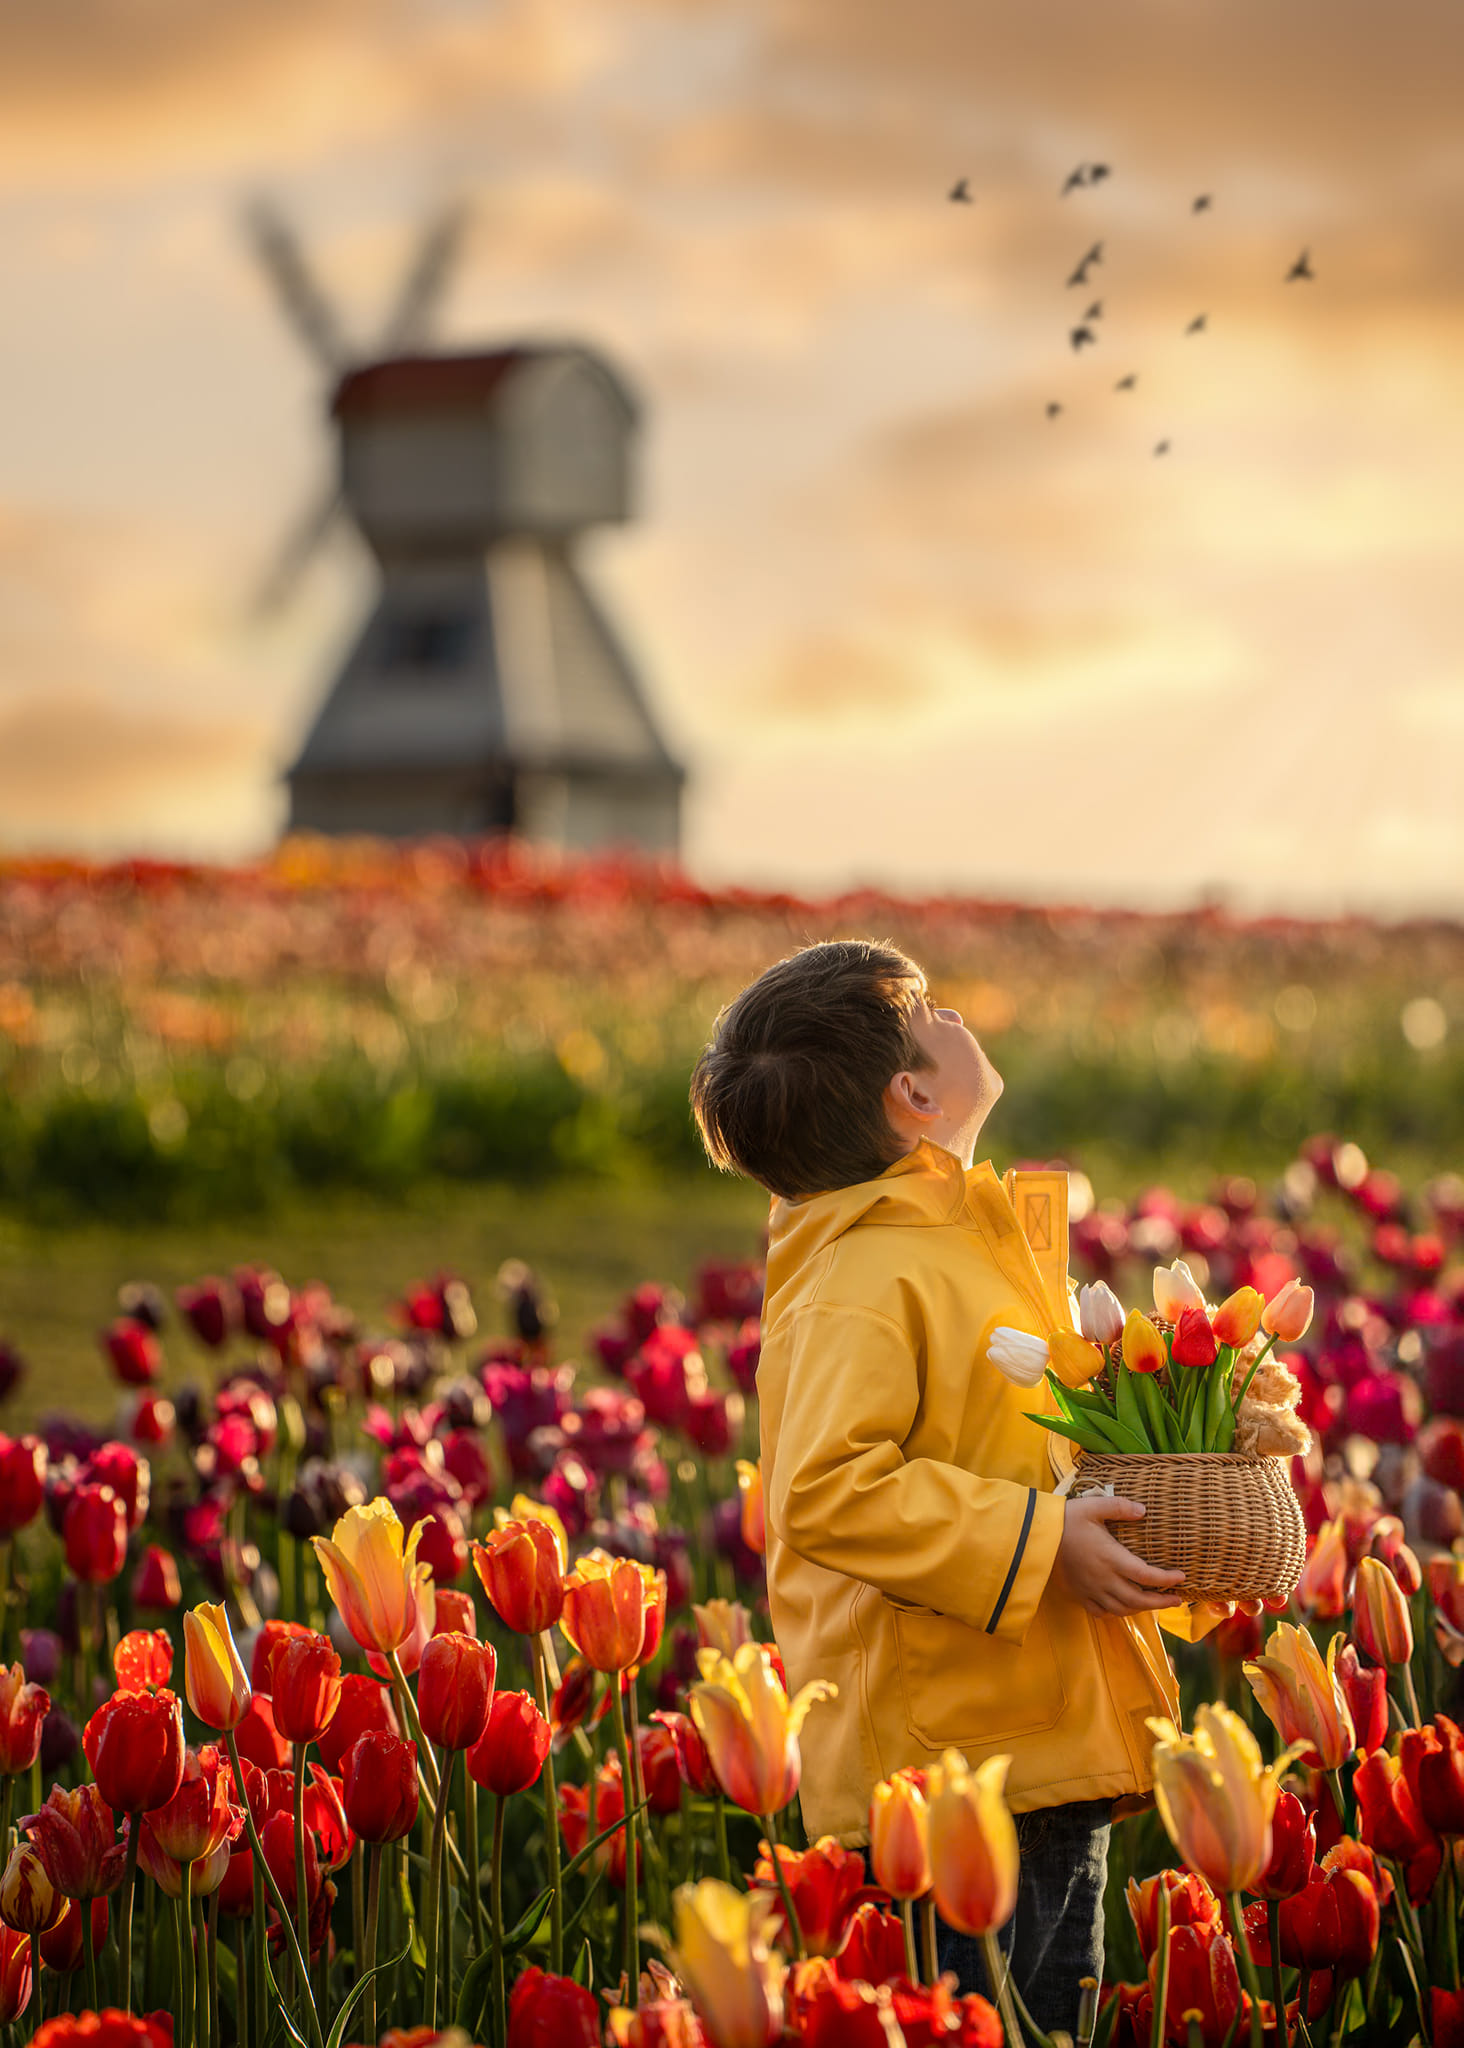 a composite photo of a child ina tulip field with a windmill in the background